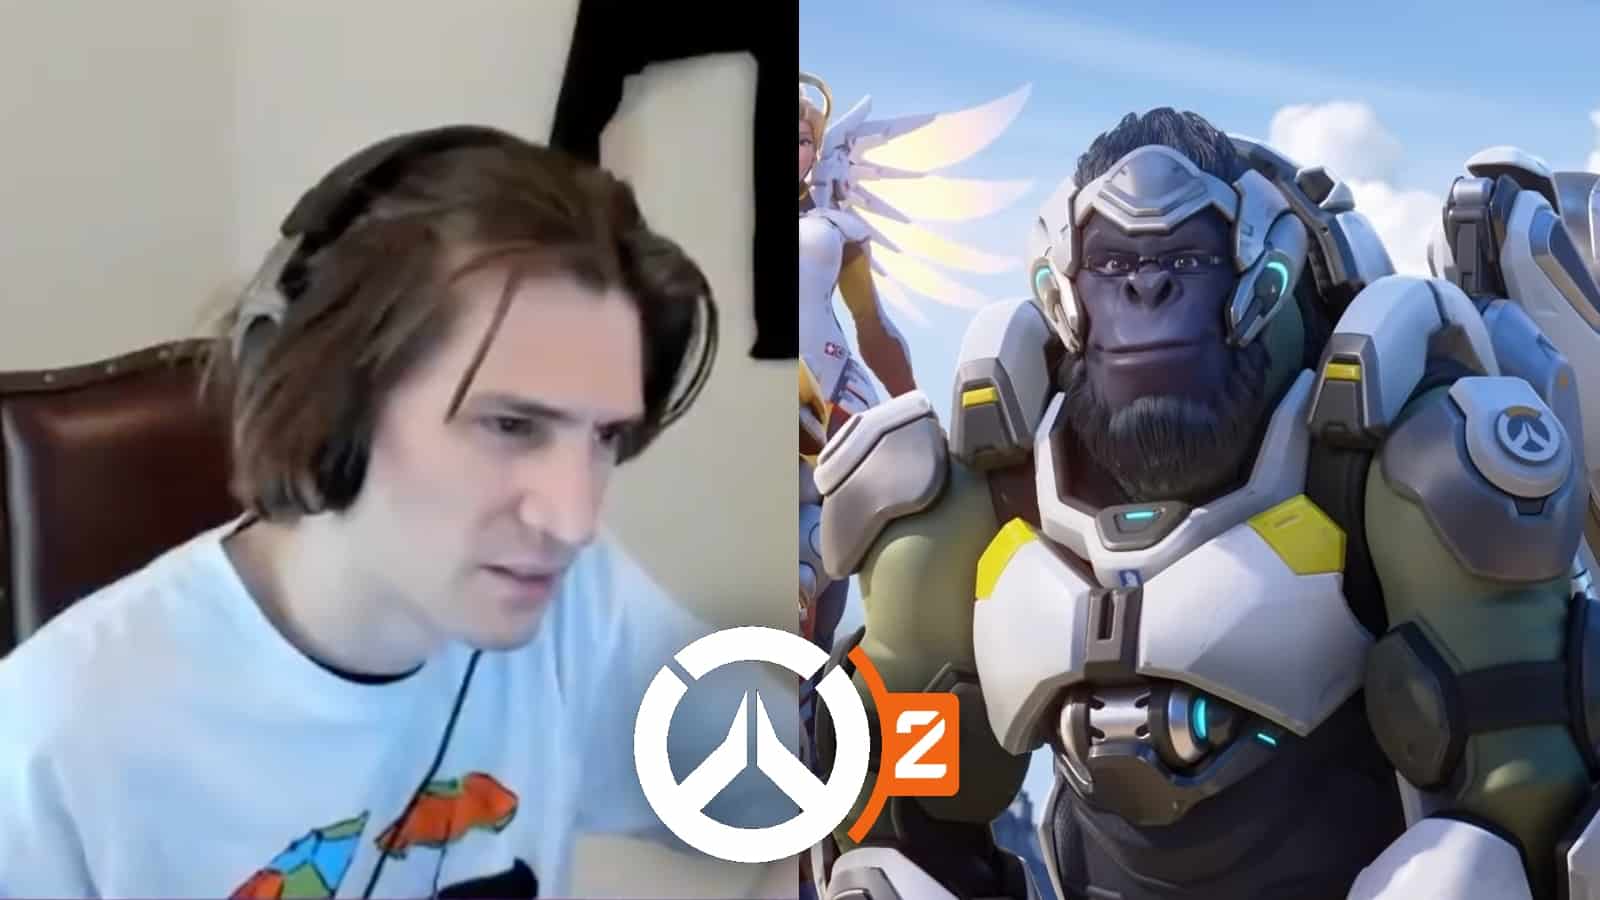 xQc and Winston with Overwatch 2 logo